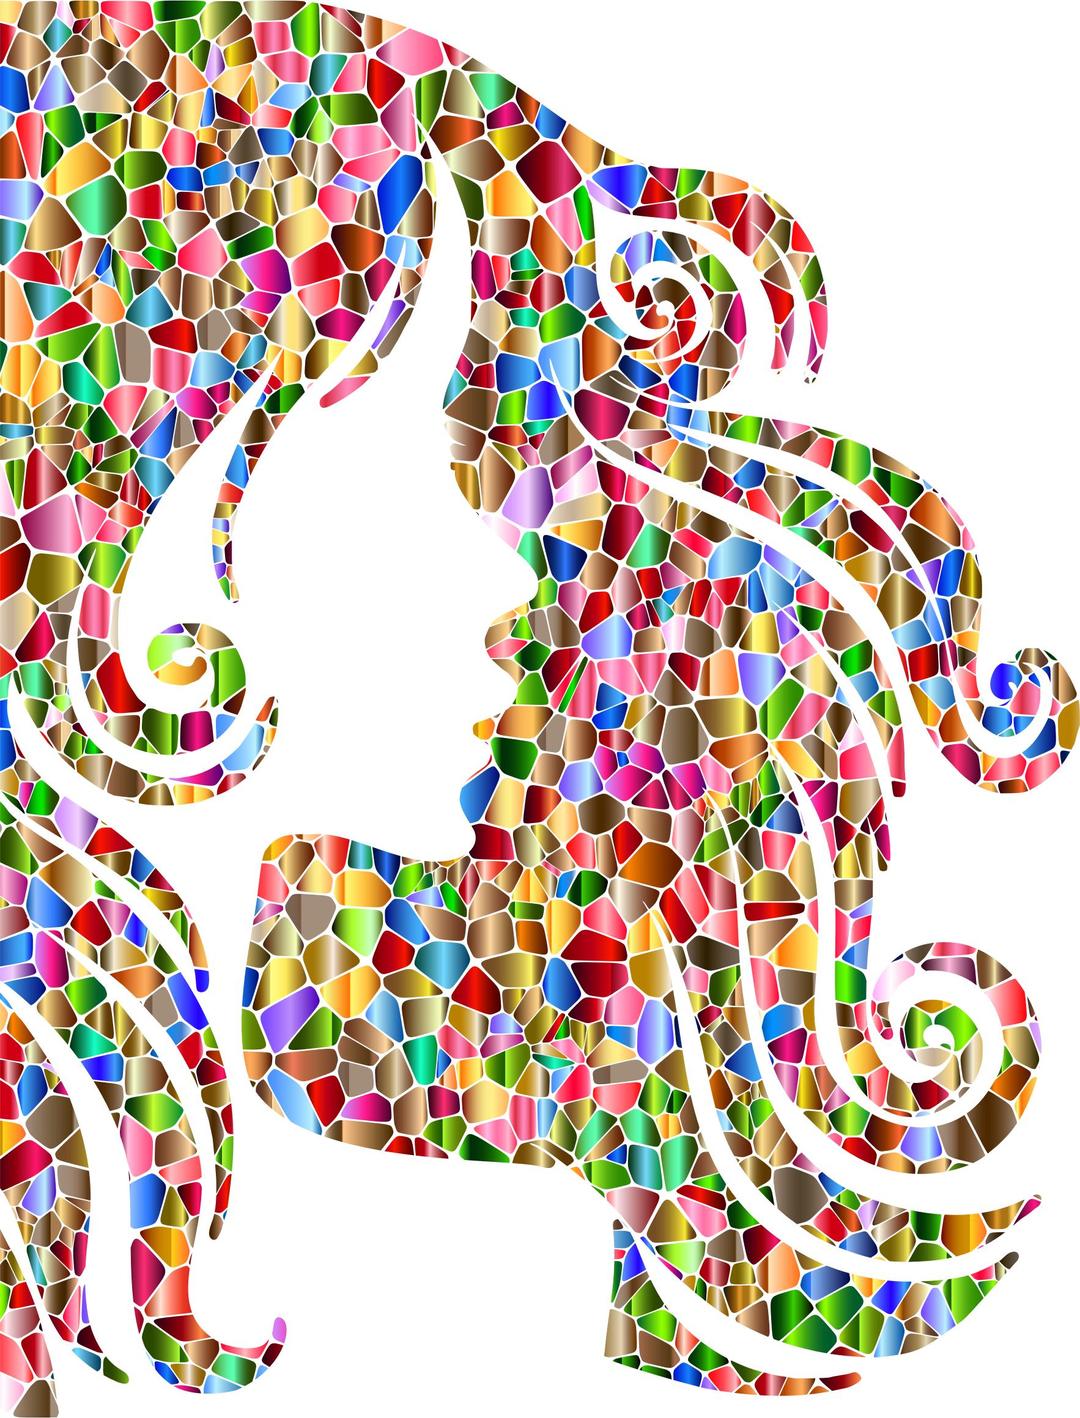 Chromatic Tiled Female Hair Profile Silhouette png transparent